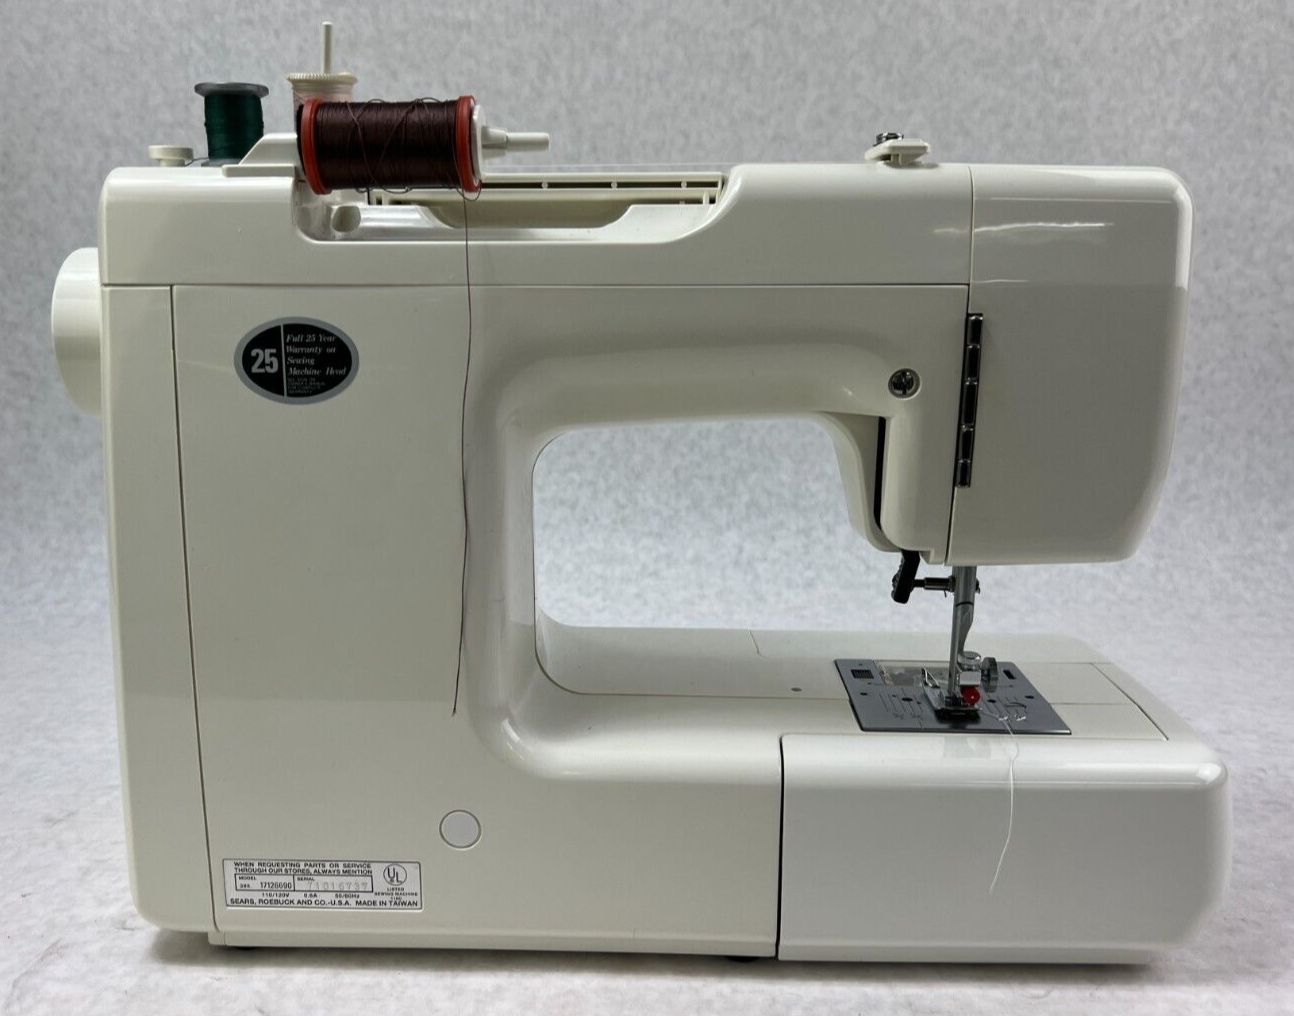 Kenmore Sewing Machine- Model 385 for Sale in Boca Raton, FL - OfferUp